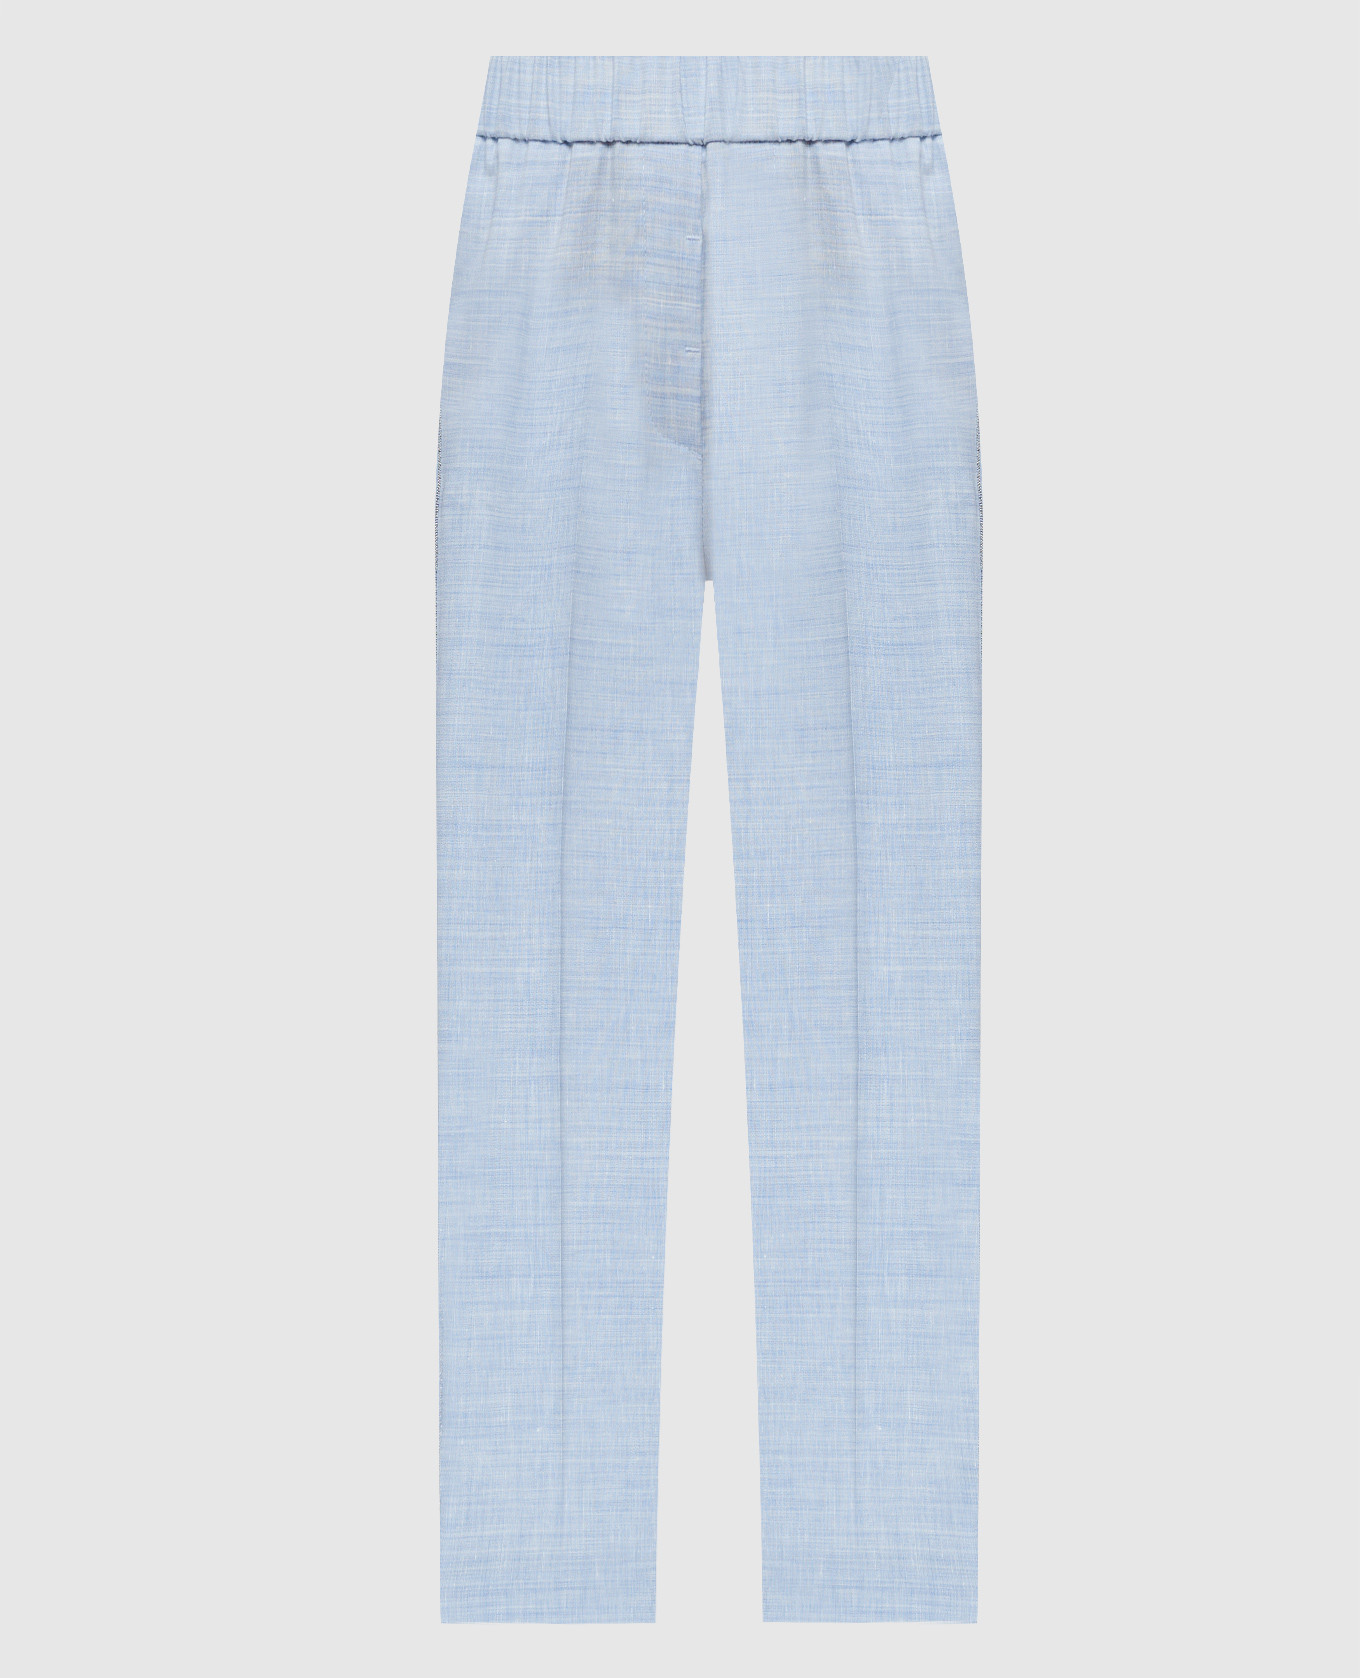 Blue melange trousers in wool and linen with monil chain